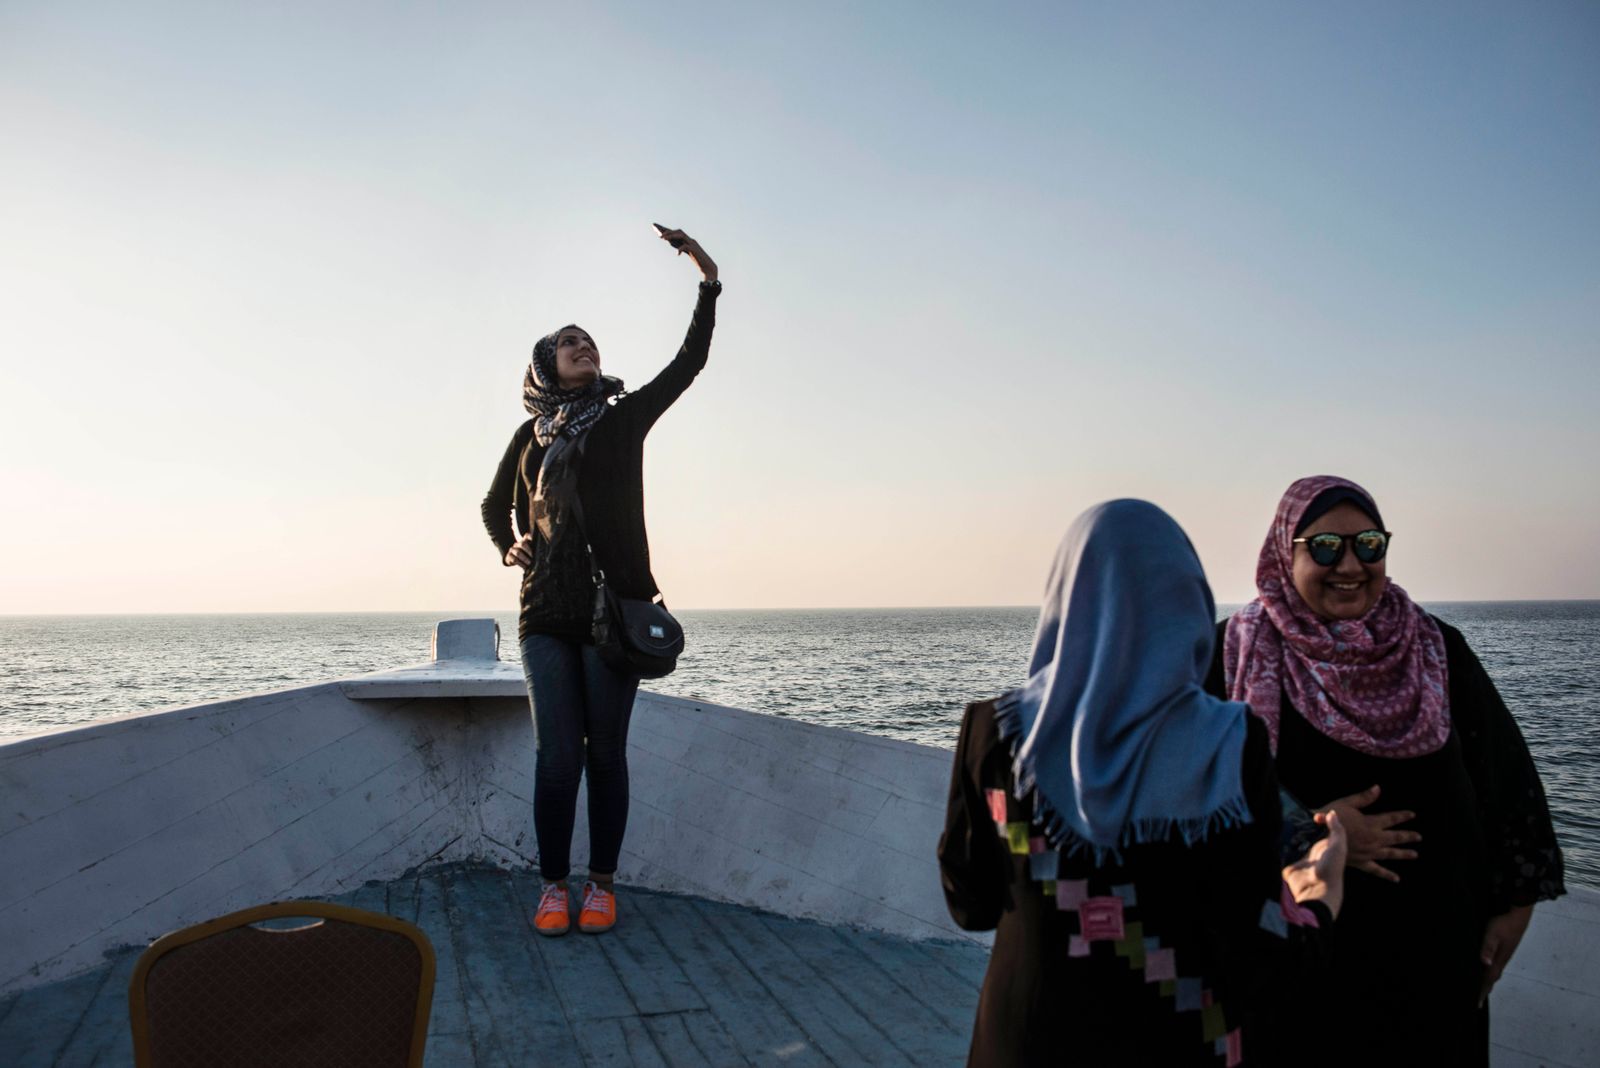 © Monique Jaques - Doaa takes a selfie at a cafe on the water in Gaza.